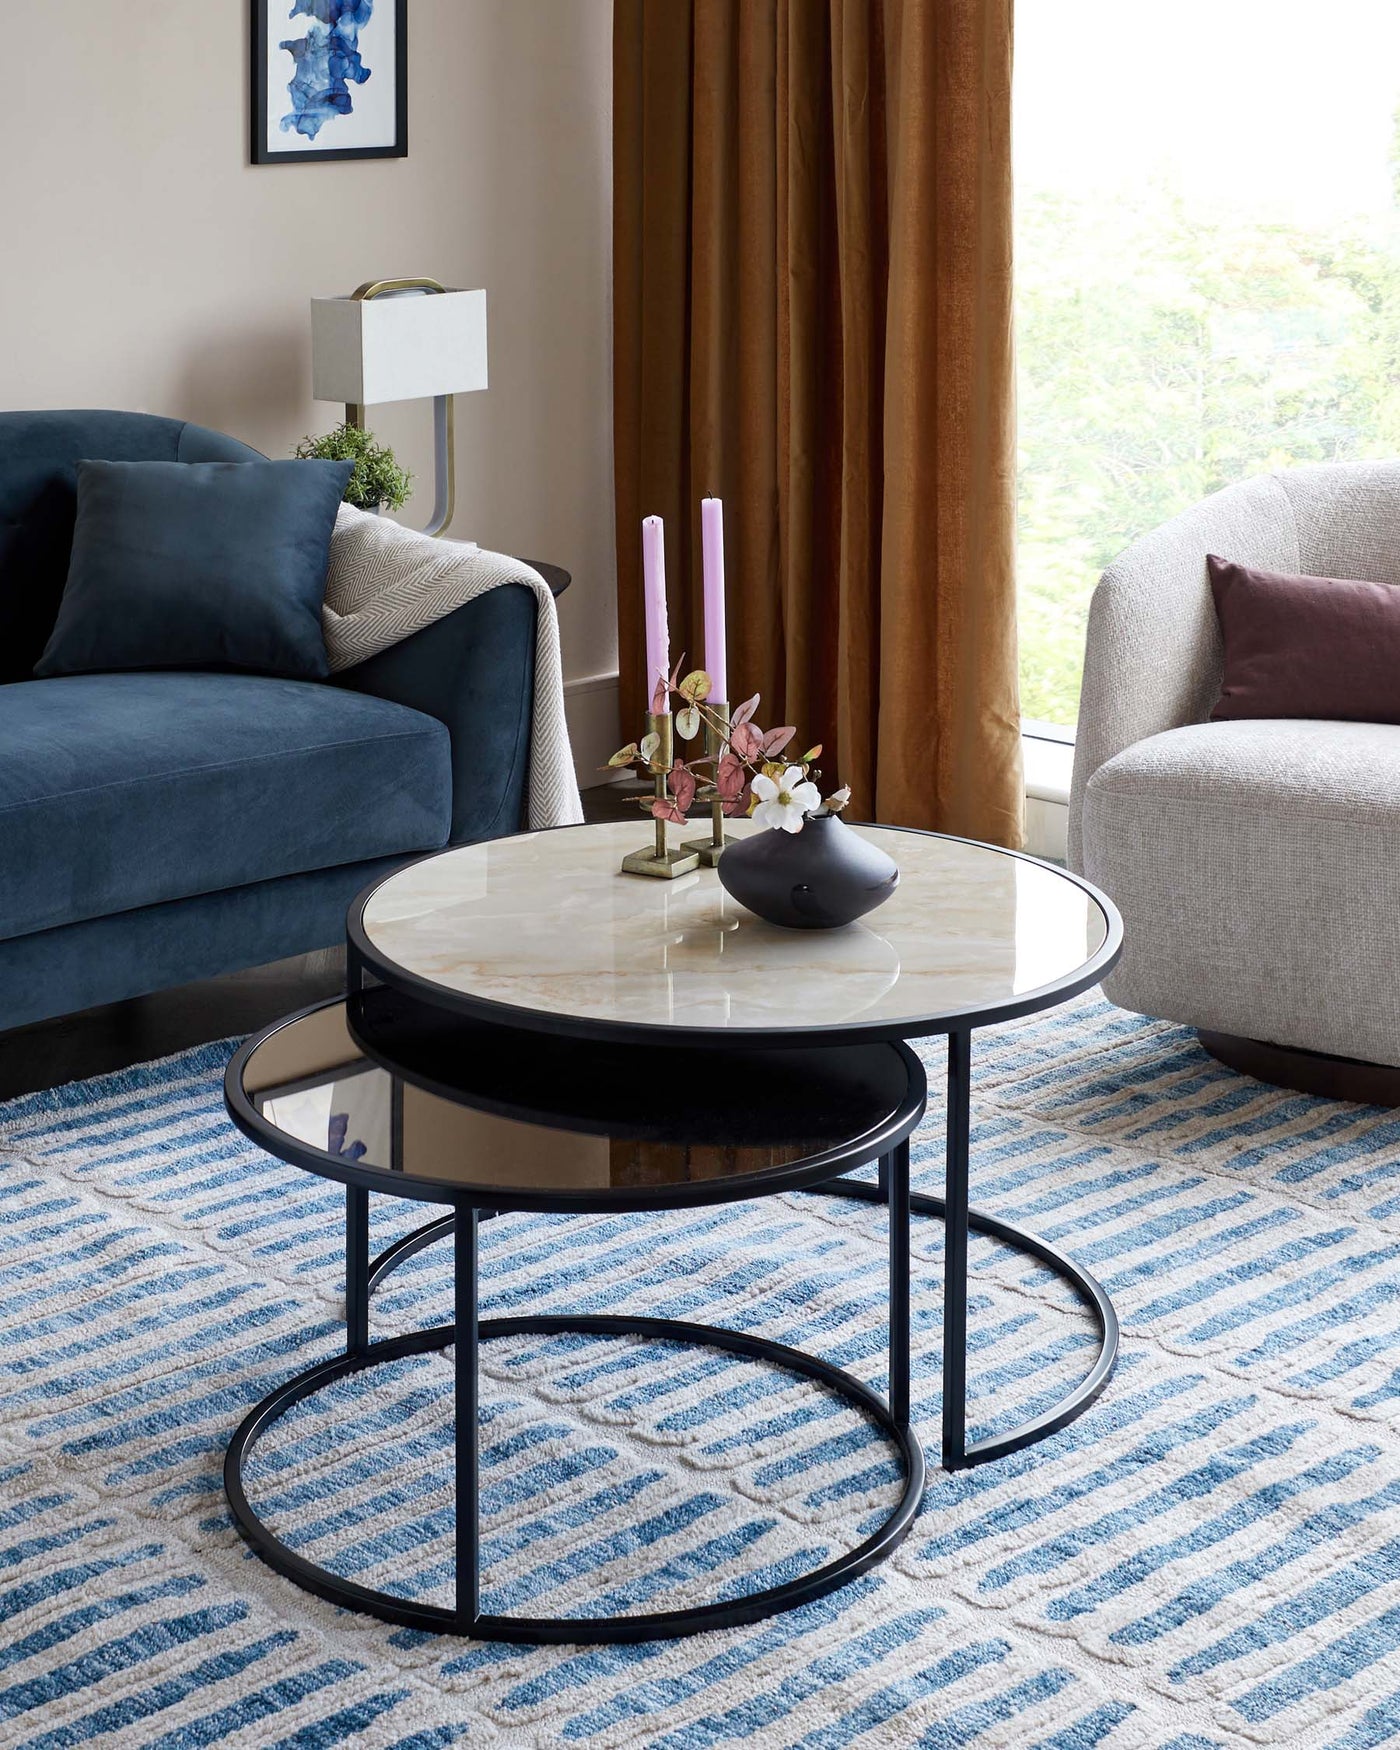 A set of two modern nesting coffee tables with circular tabletops; the larger table features a white marble surface, and the smaller table has a glossy black finish, both supported by thin black metal frames. In the background, a plush navy blue upholstered sofa with a textured throw and a light grey fabric chair with a deep red cushion can be seen.